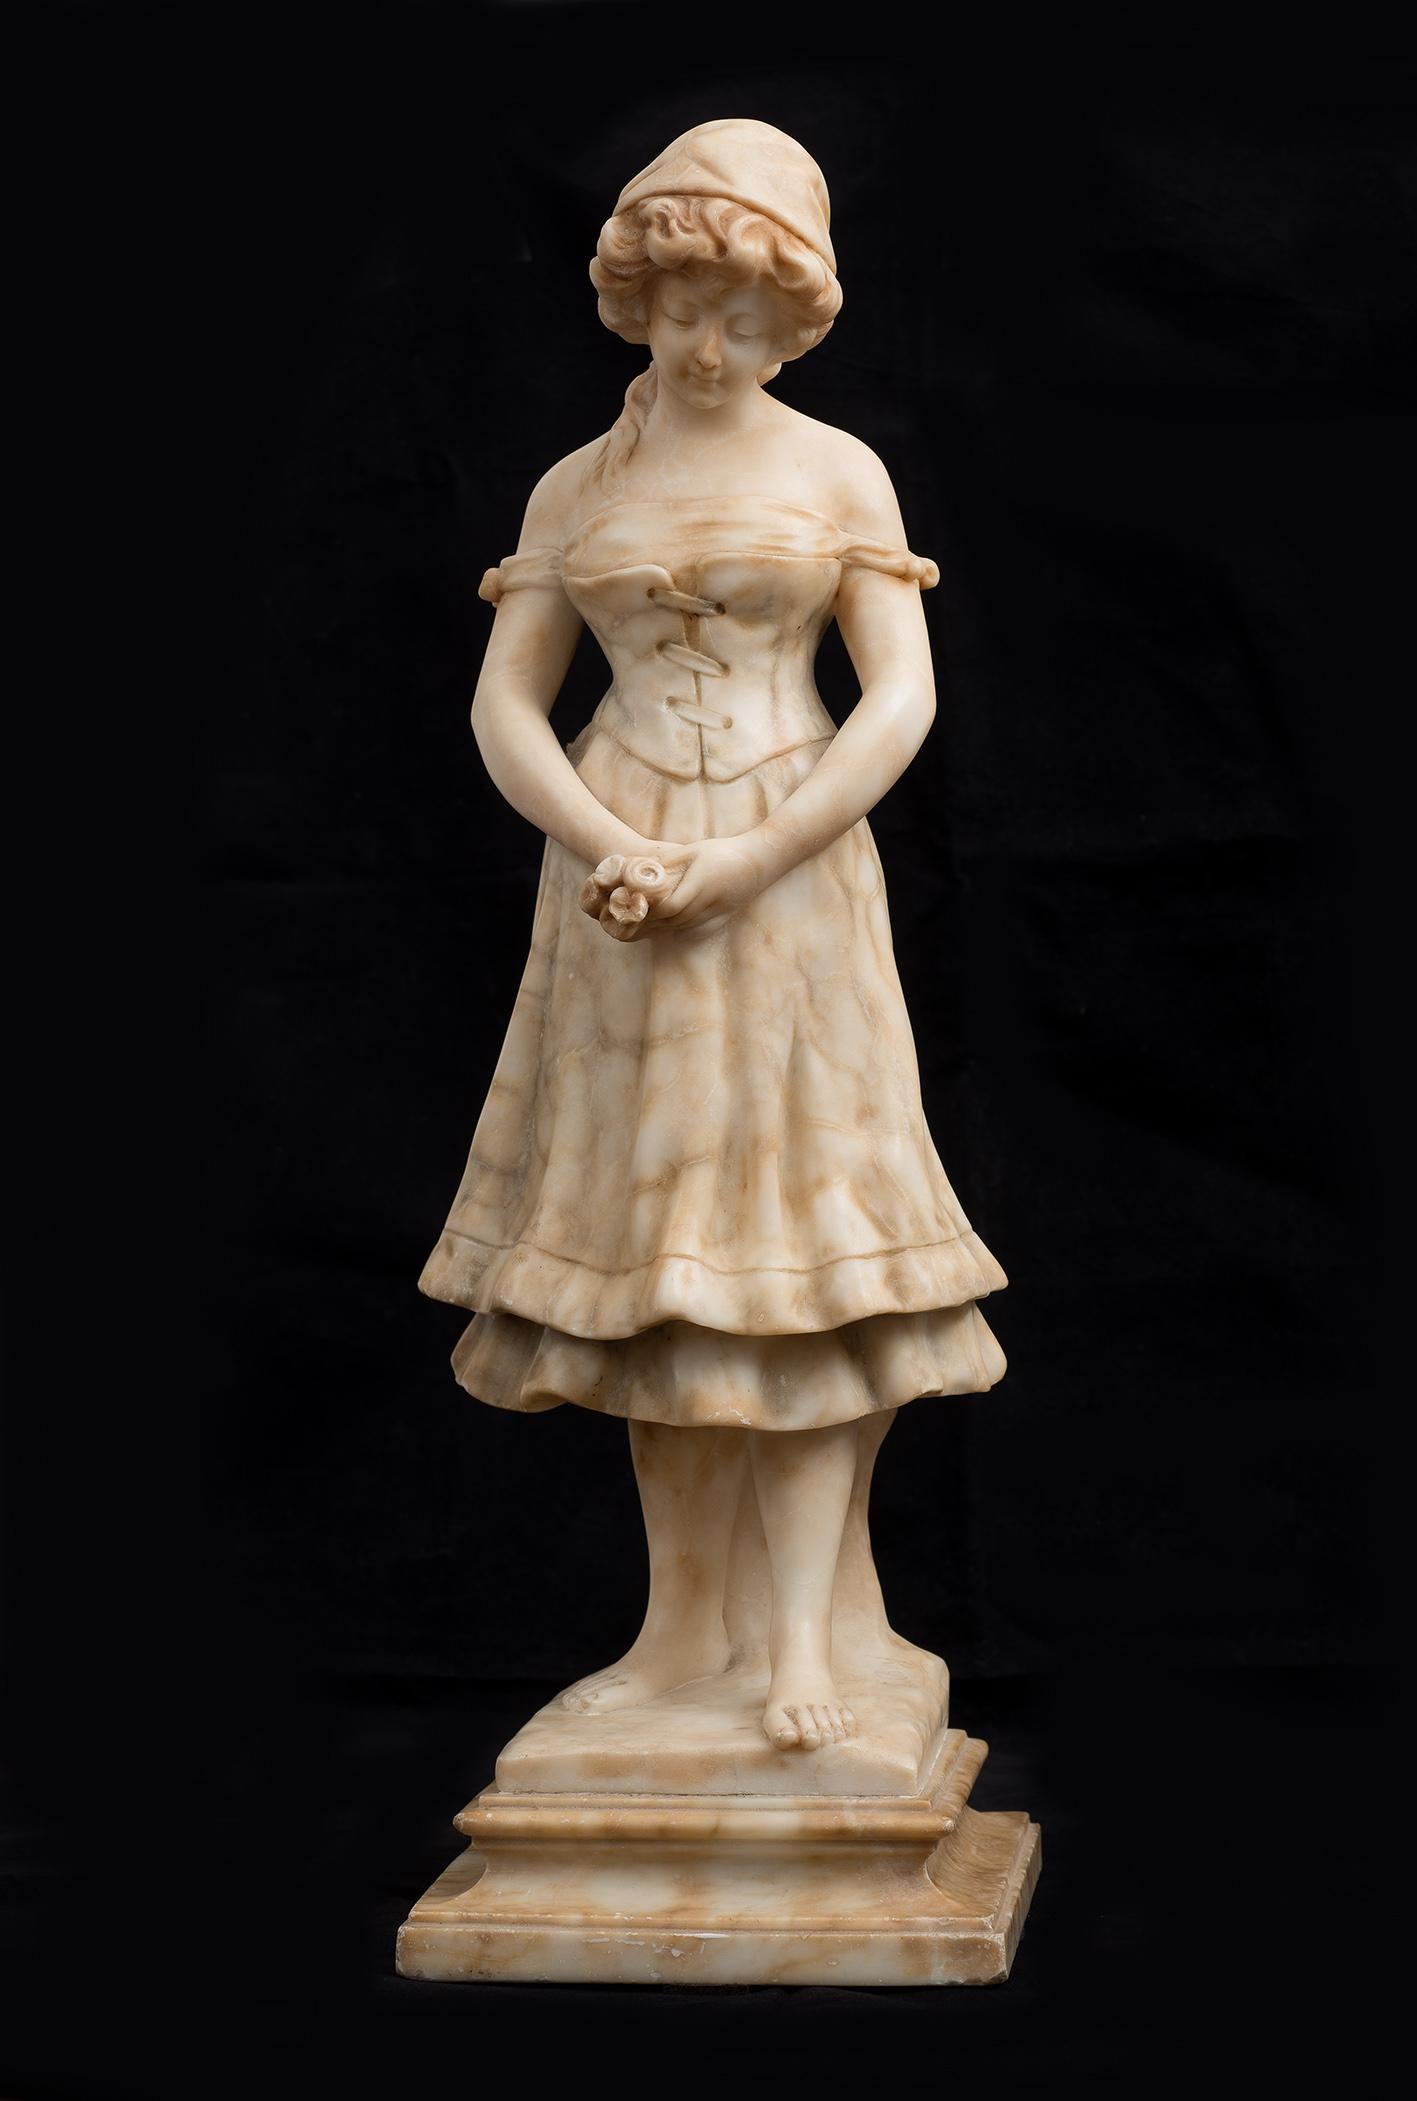 Unknown Figurative Sculpture - Antique French Napoleon III alabaster sculpture signed Le Roy. 19th century